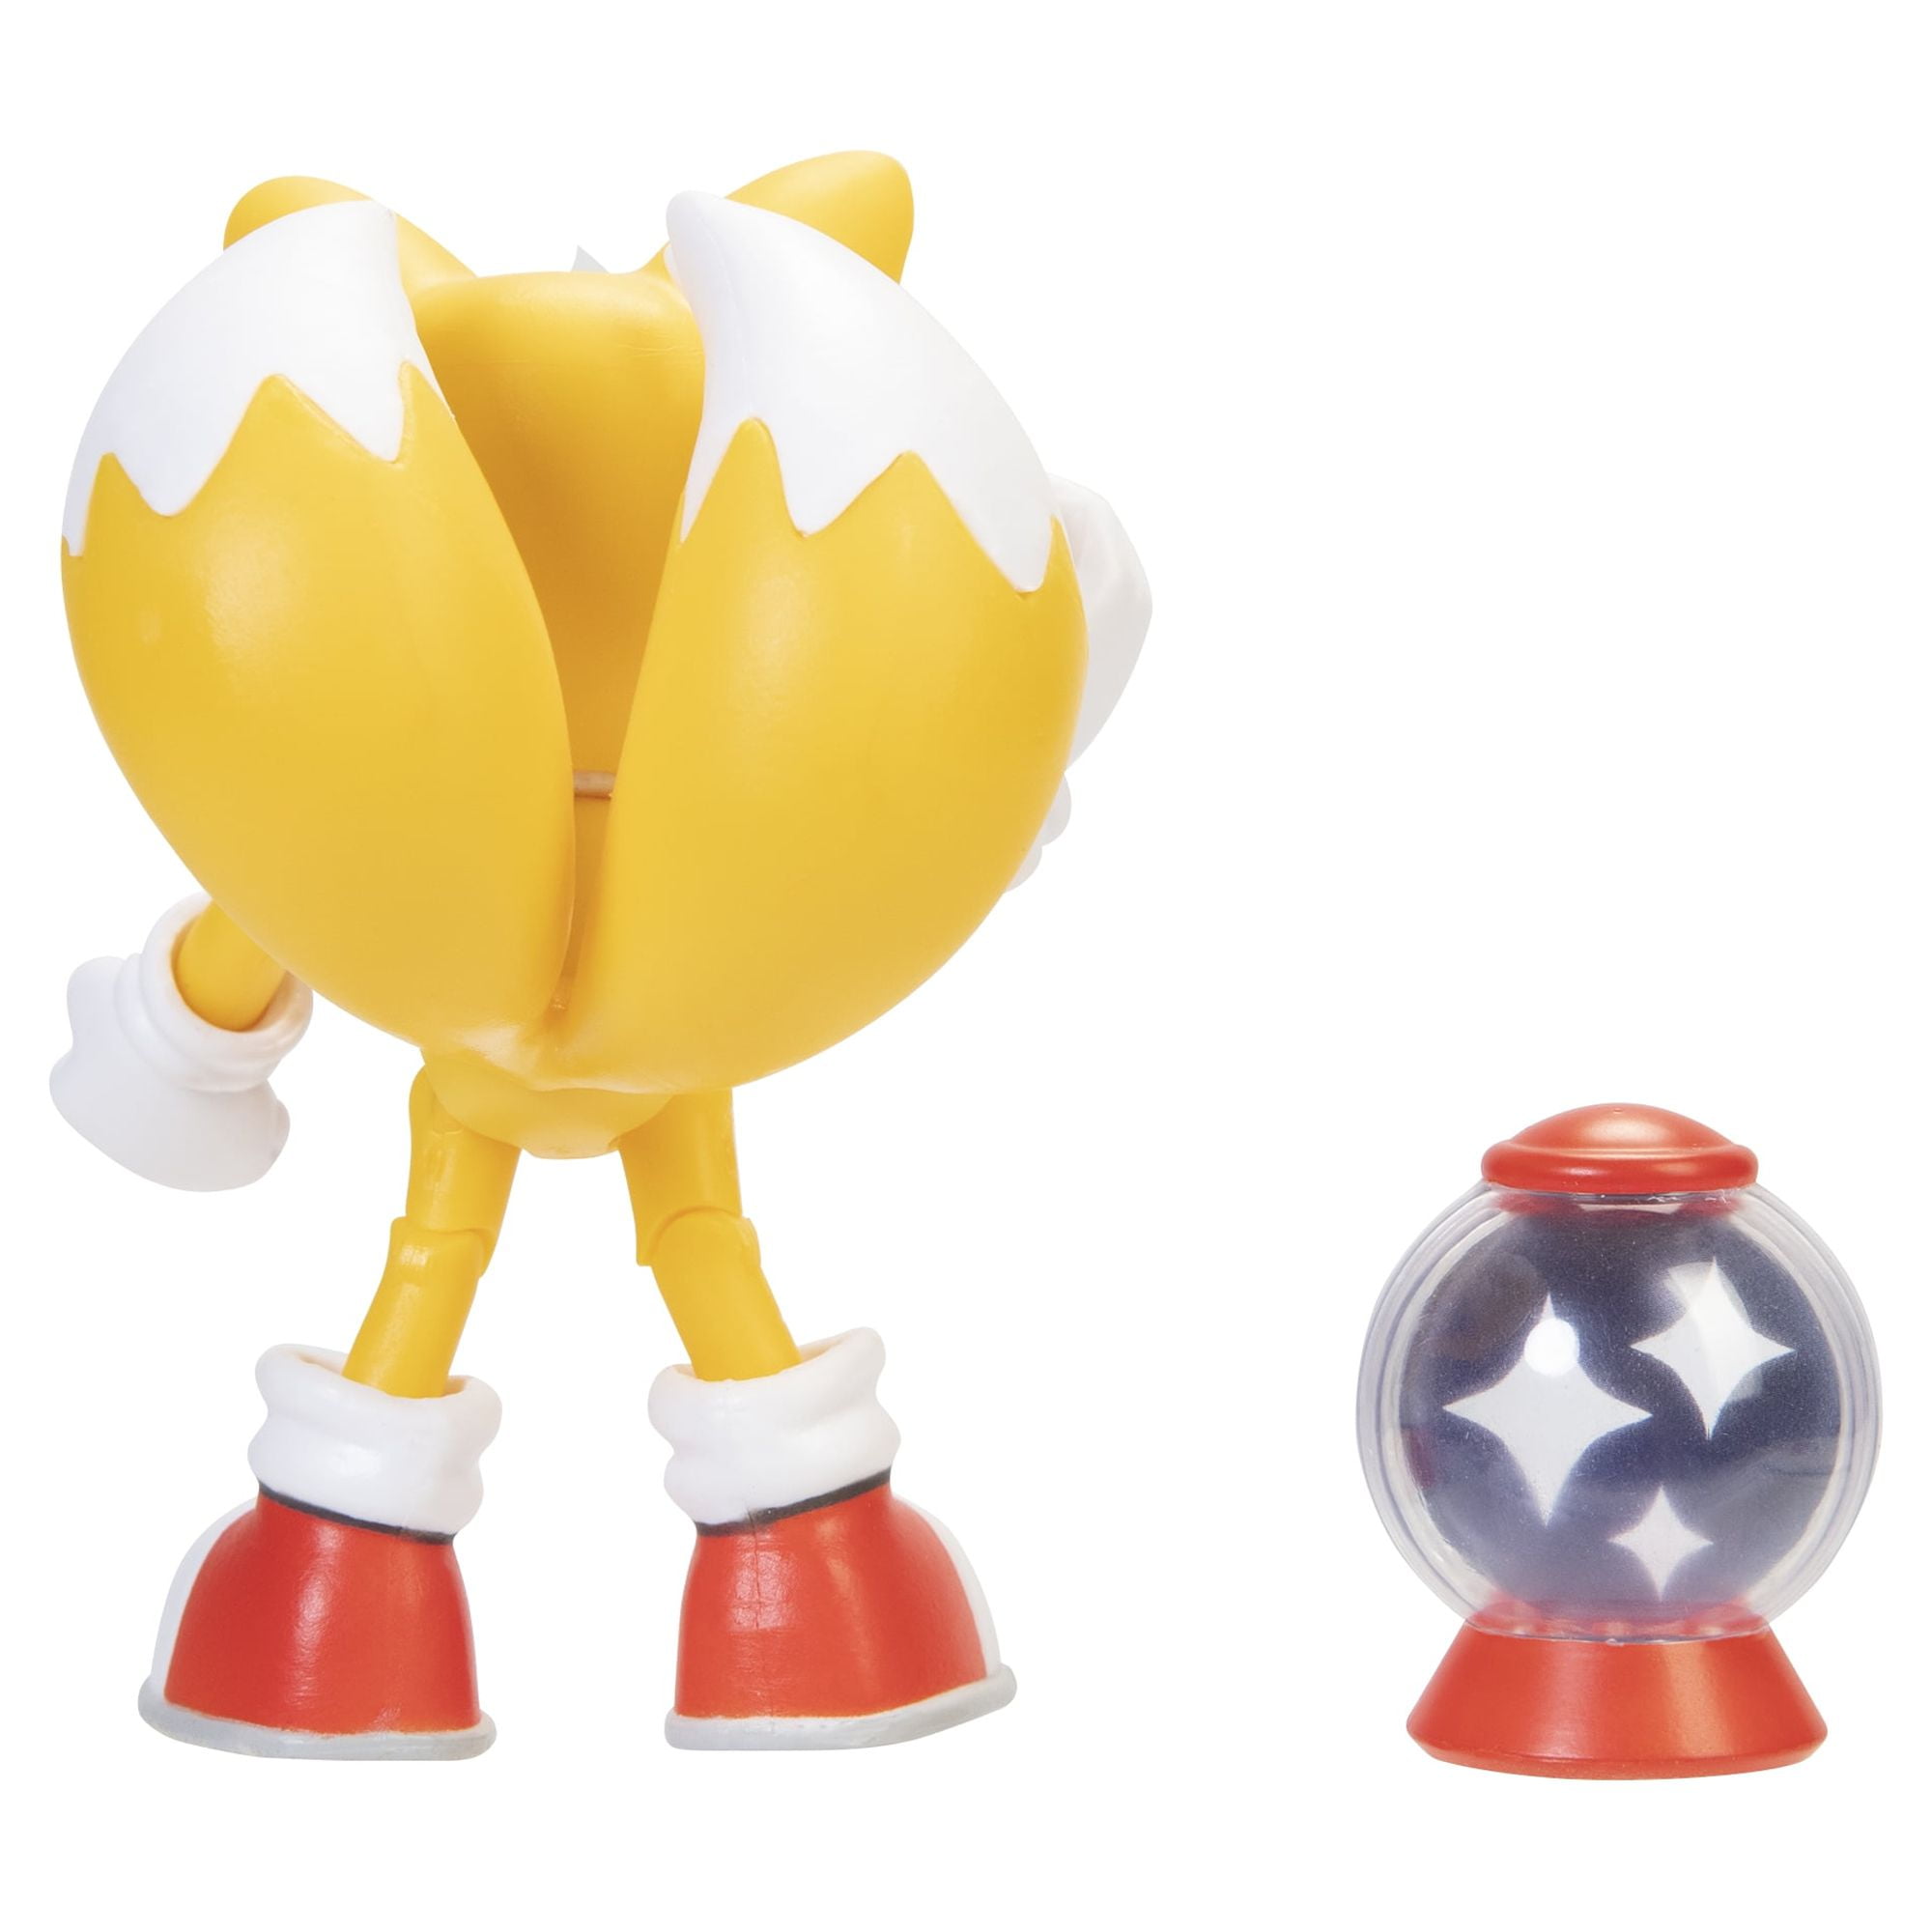 Sonic the Hedgehog Classic Tails Super Stretchy Toy Action Figure